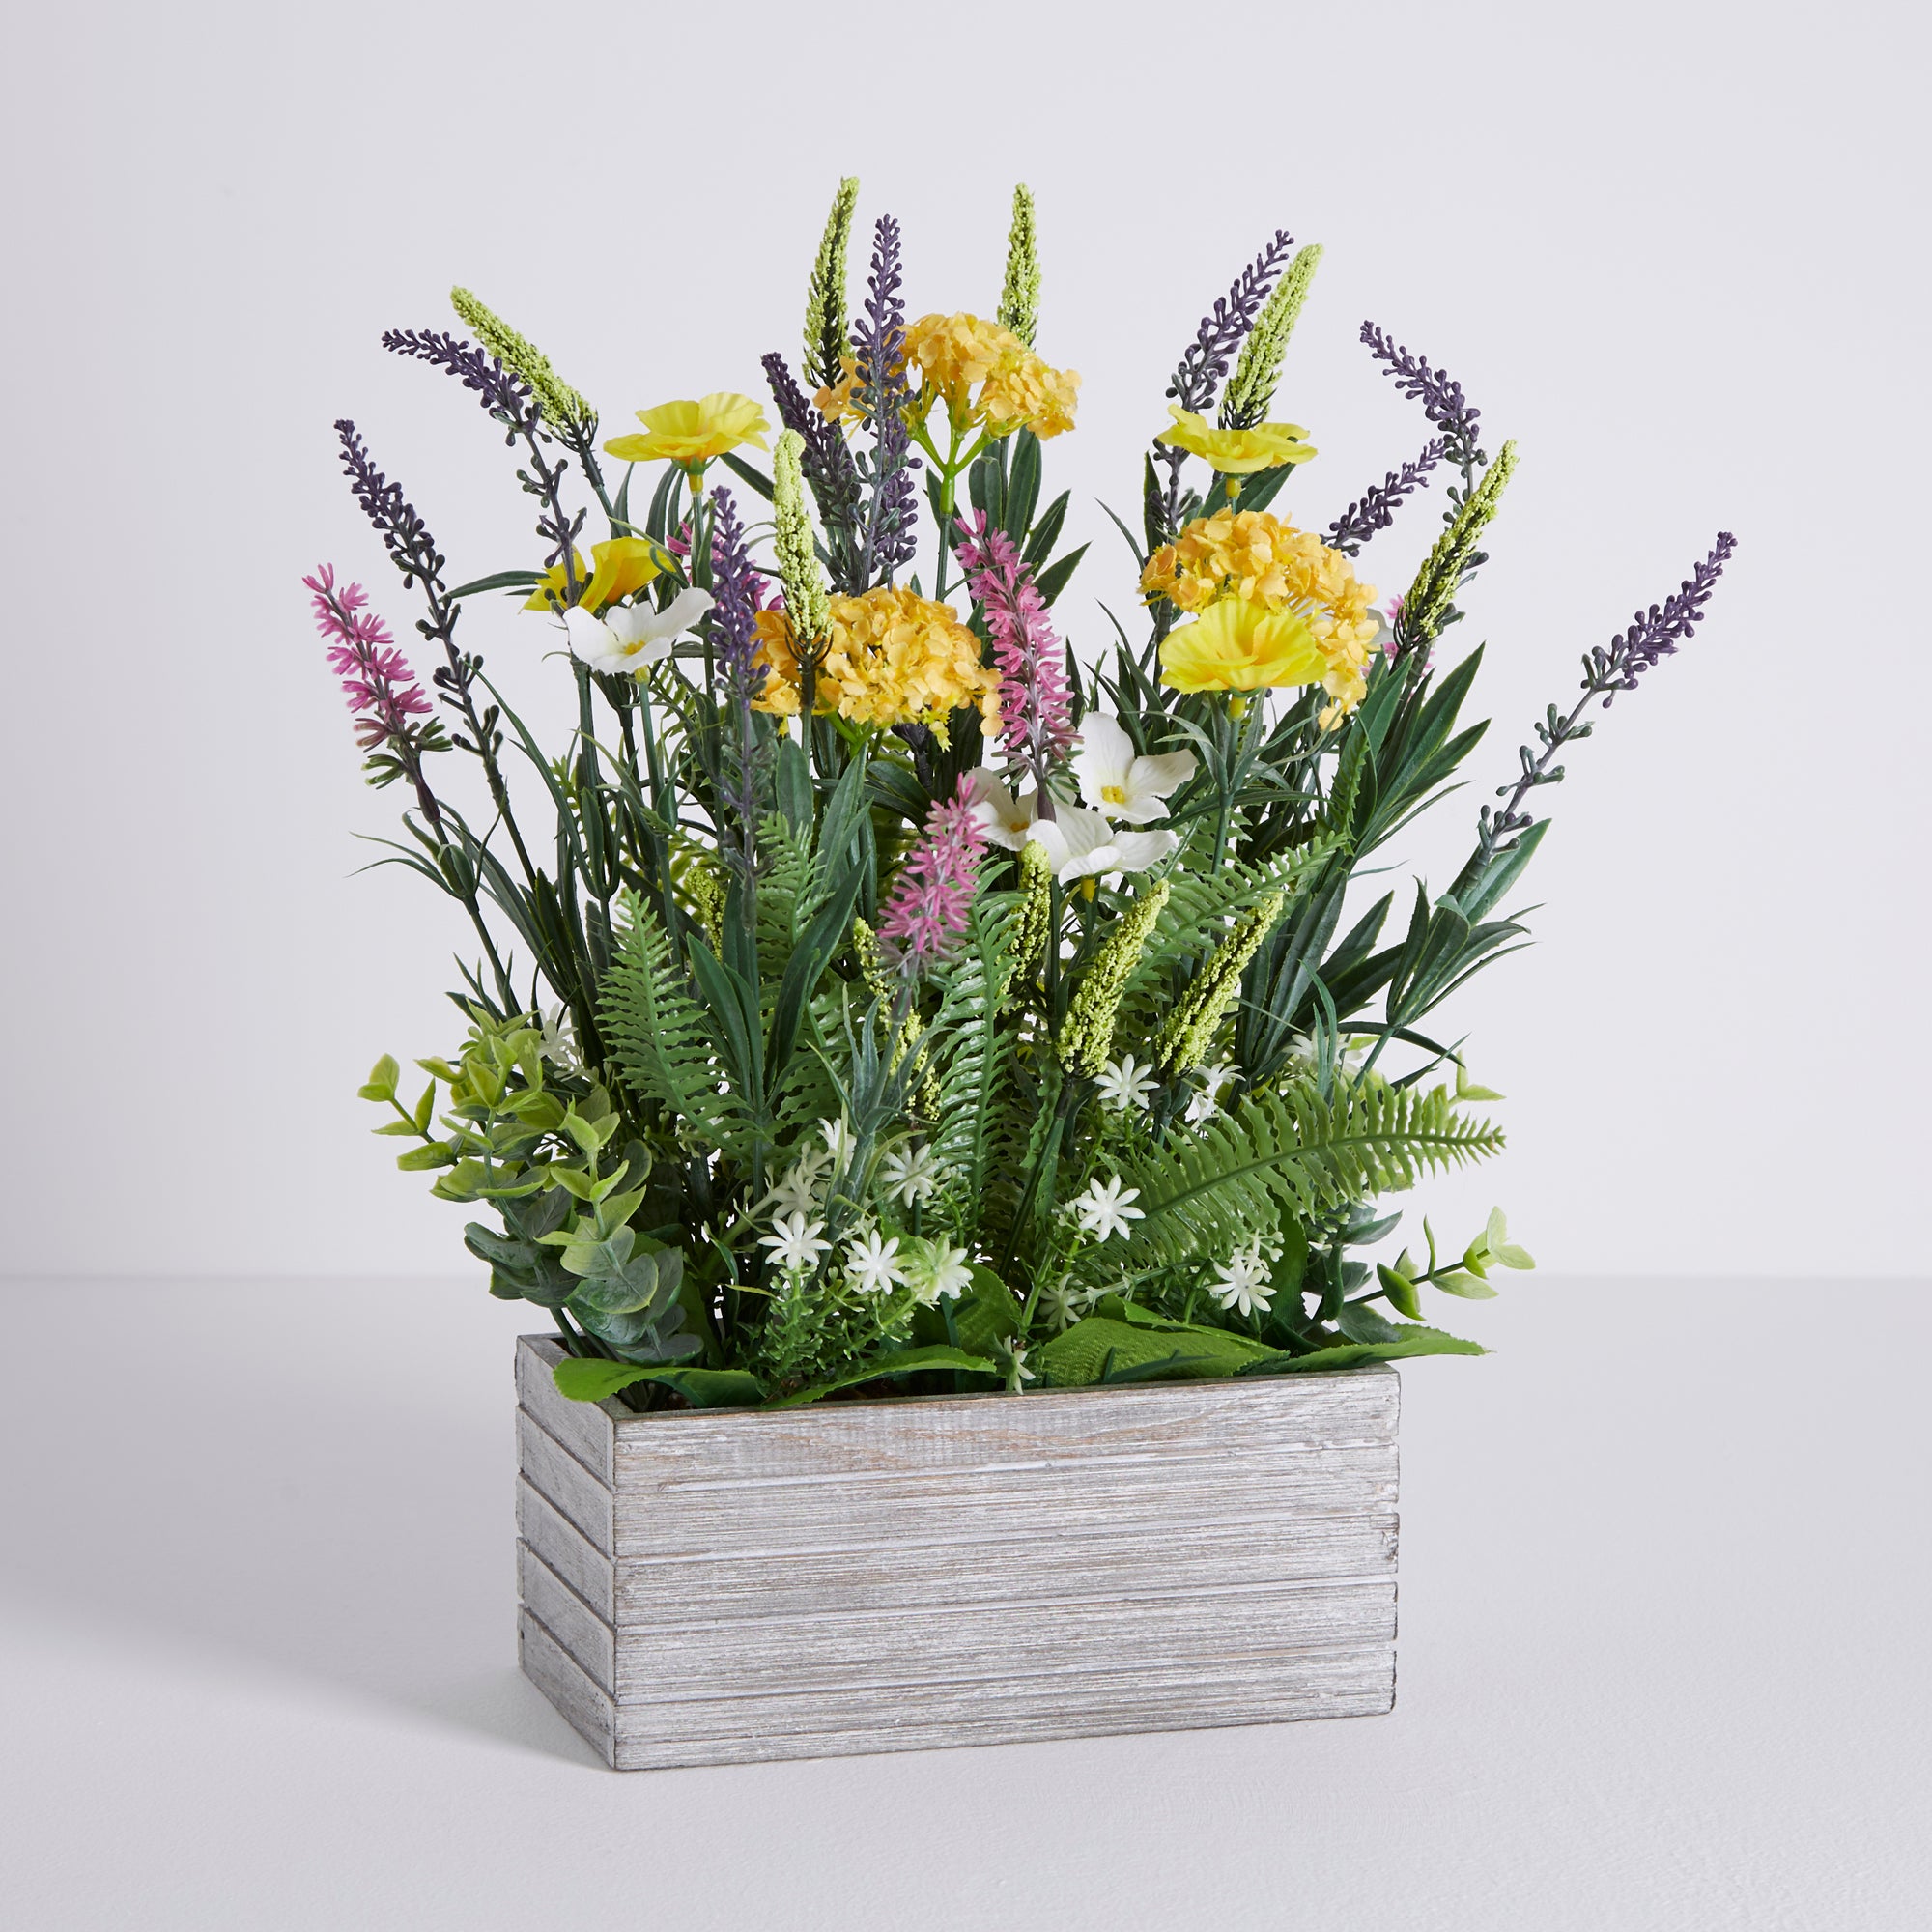 Artificial Wild Flowers in a Wooden Planter